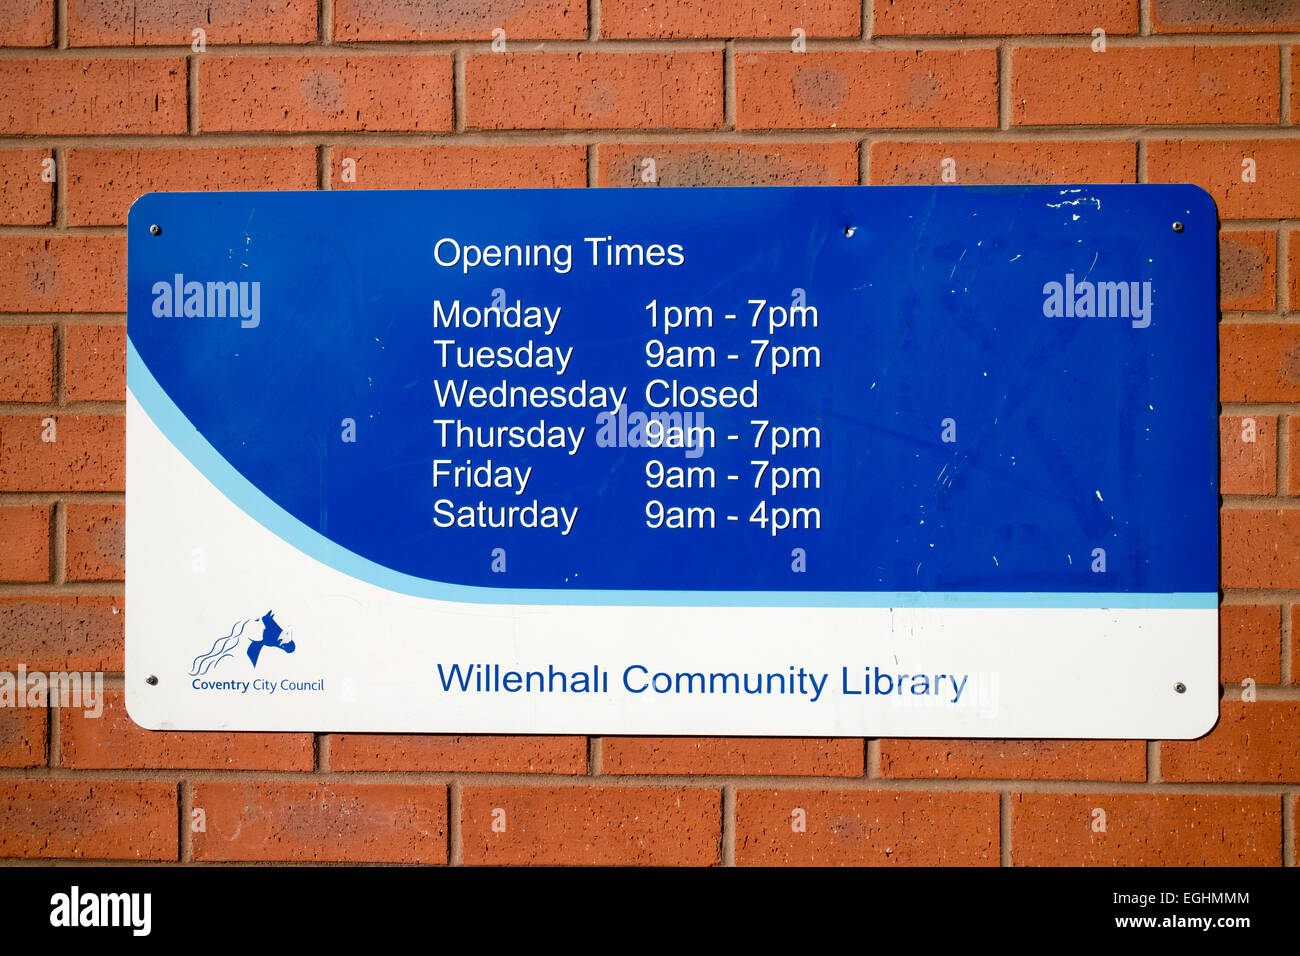 Coventry Opening Times - wide 3